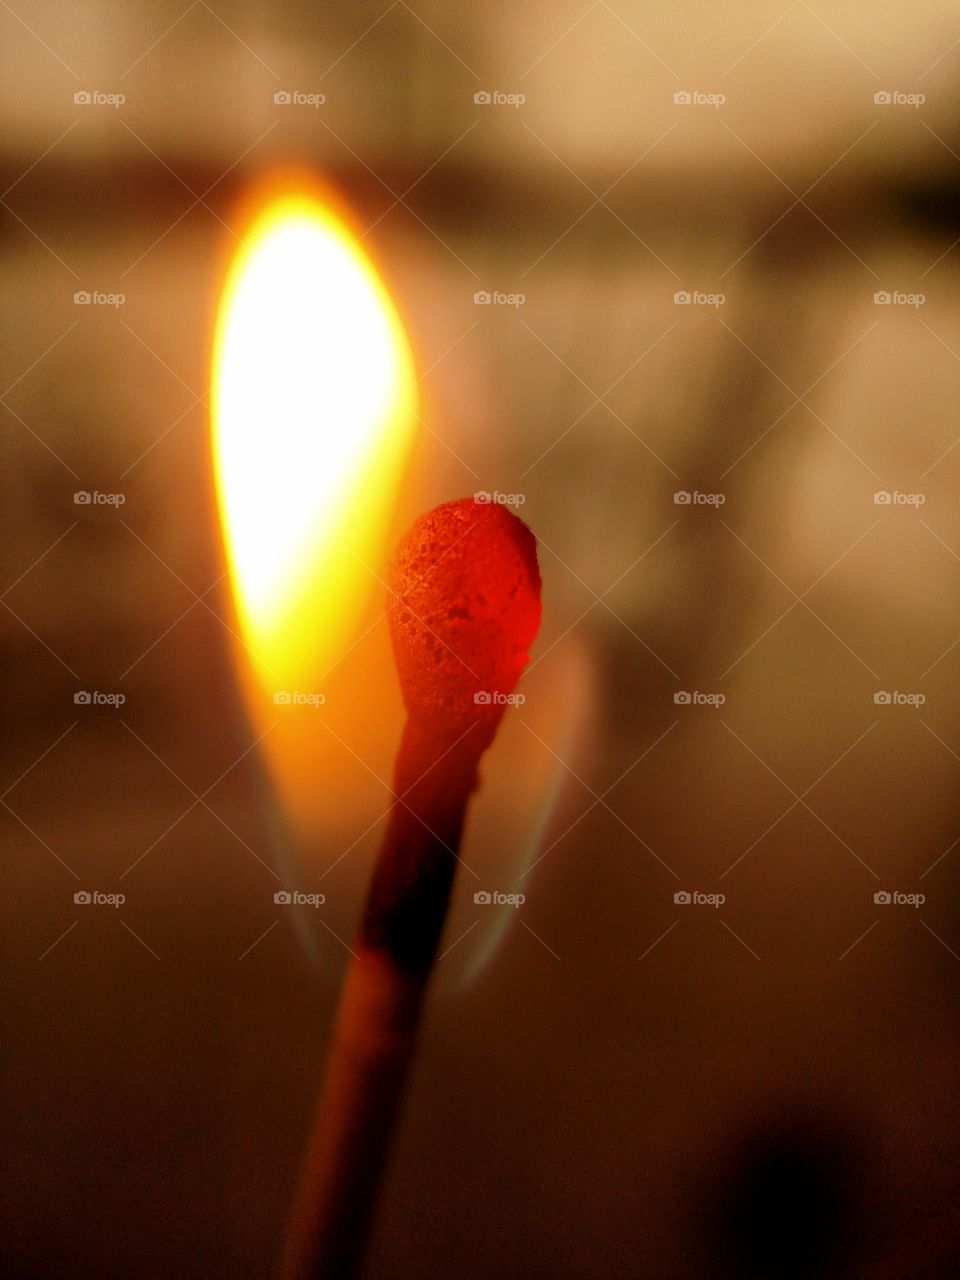 PURE FLAMES OF MATCHSTICK